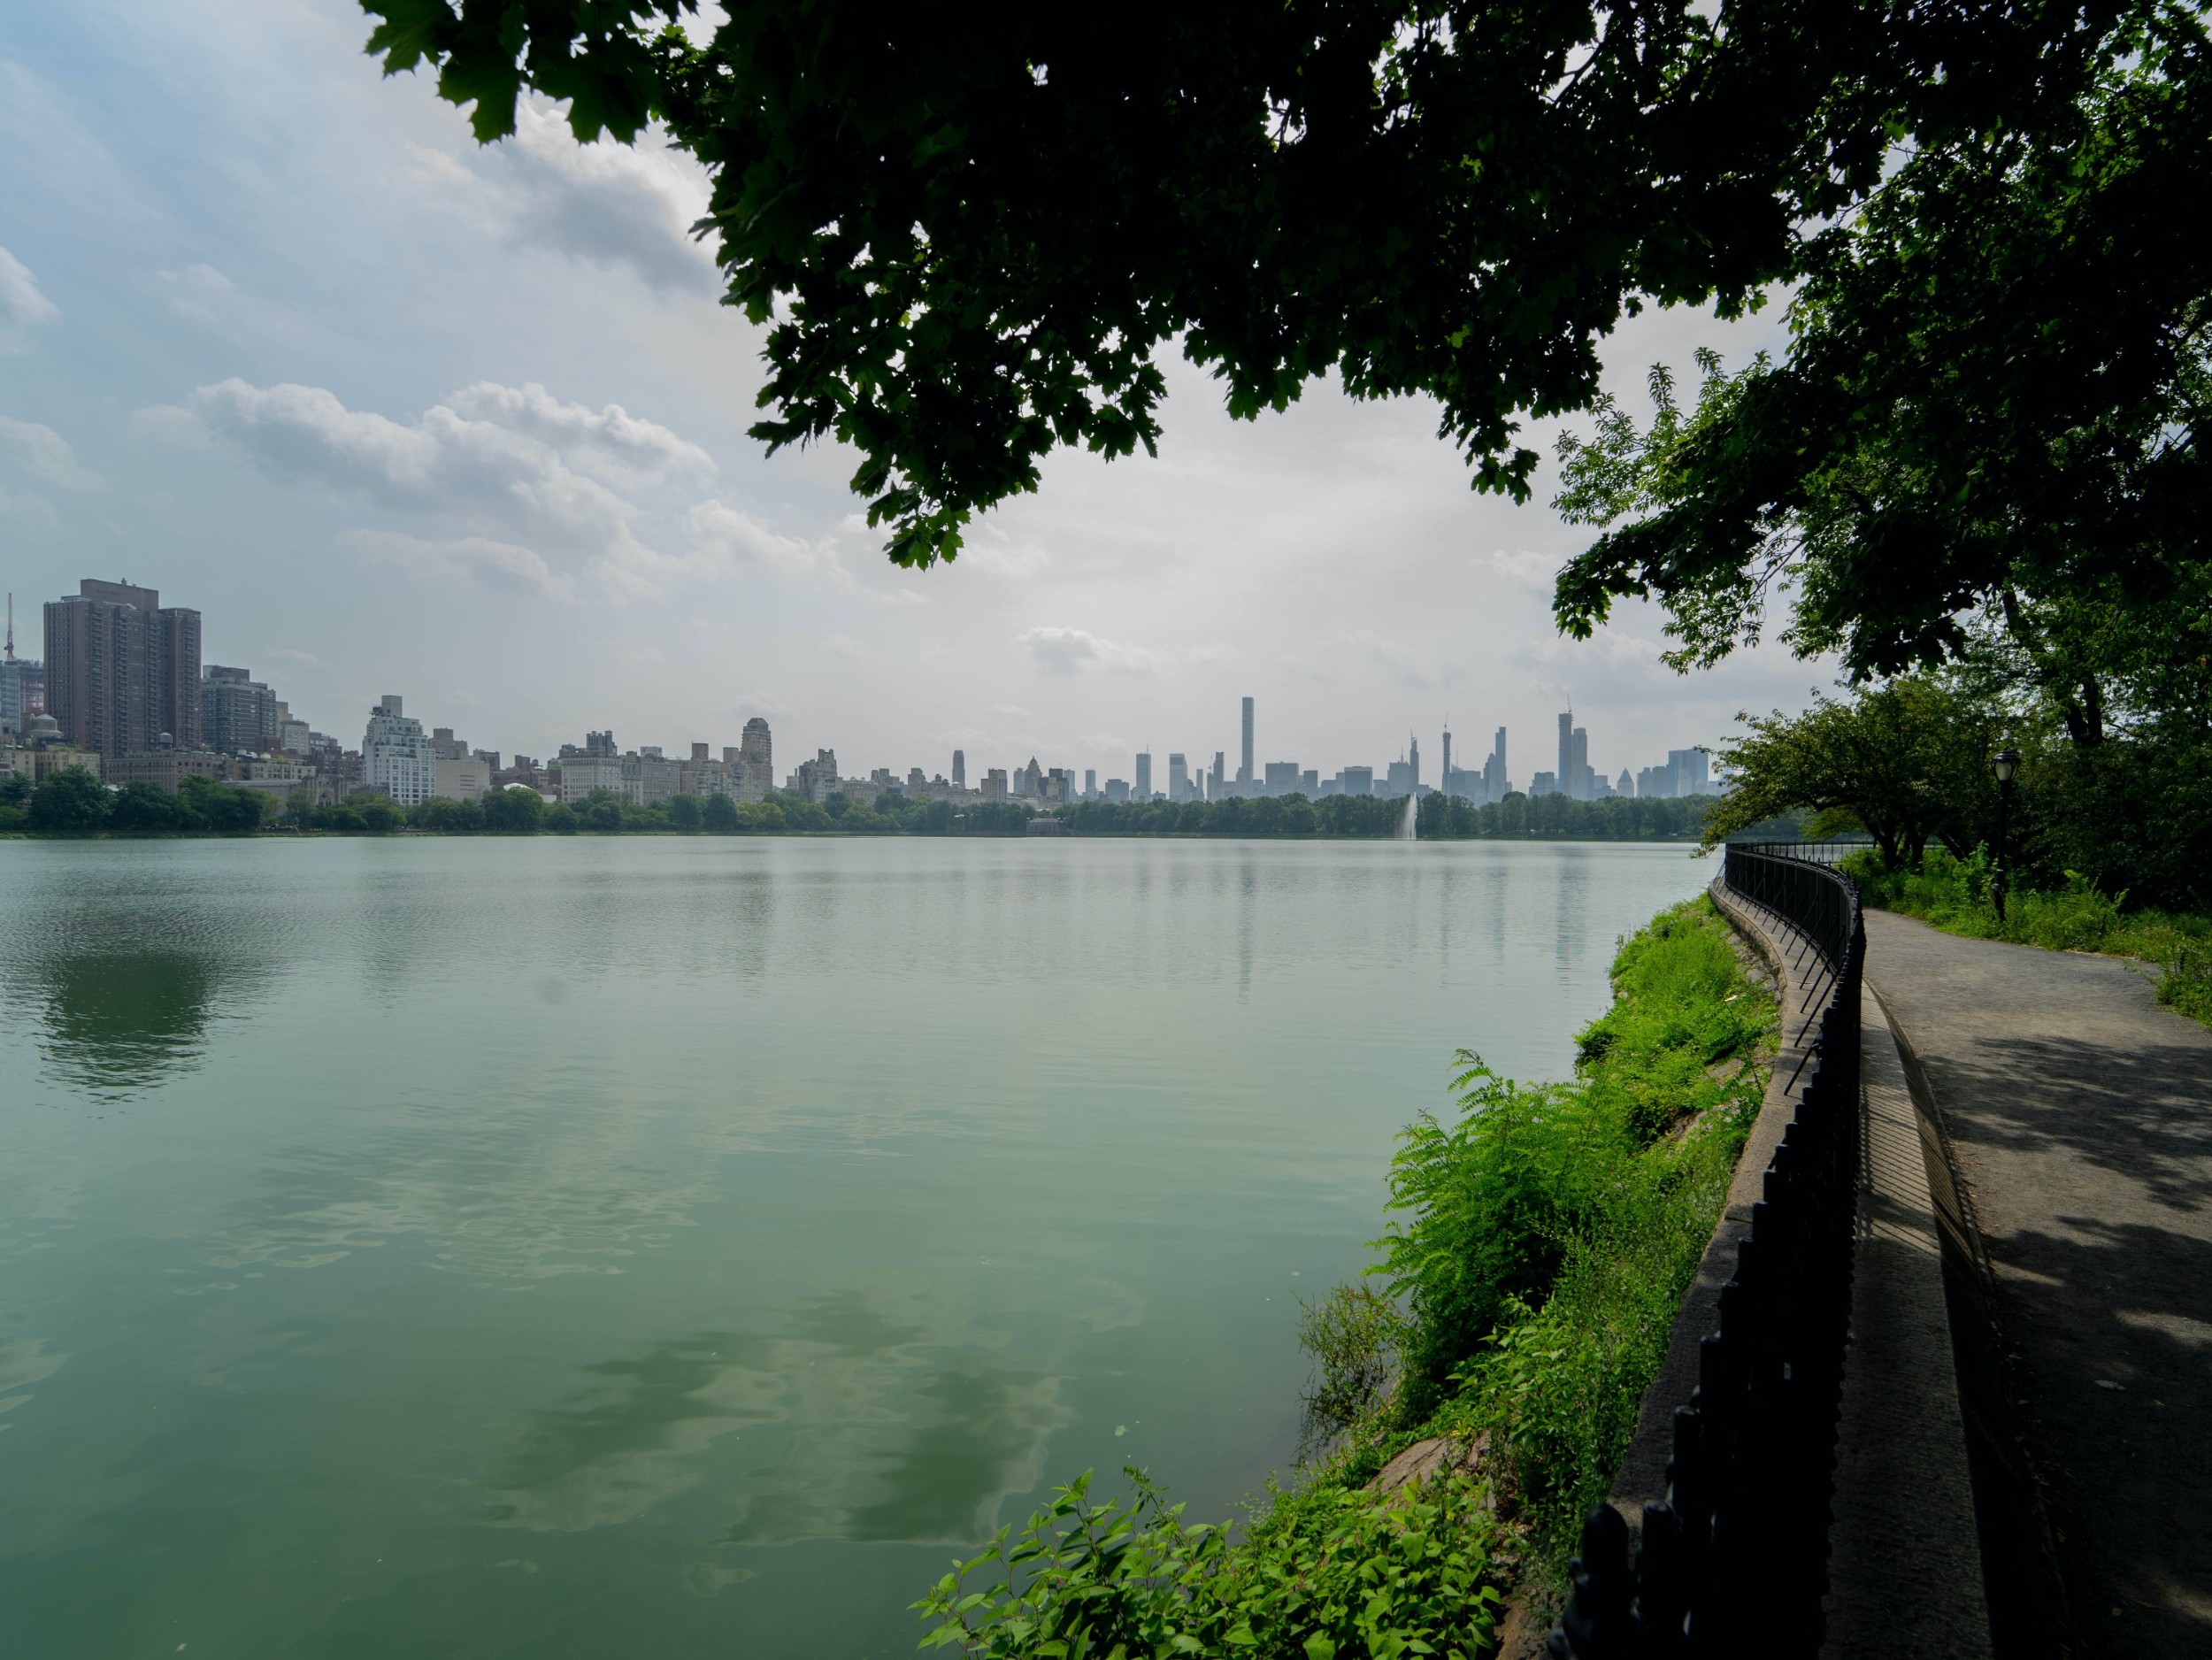 The Jacqueline Kennedy Onassis Reservoir